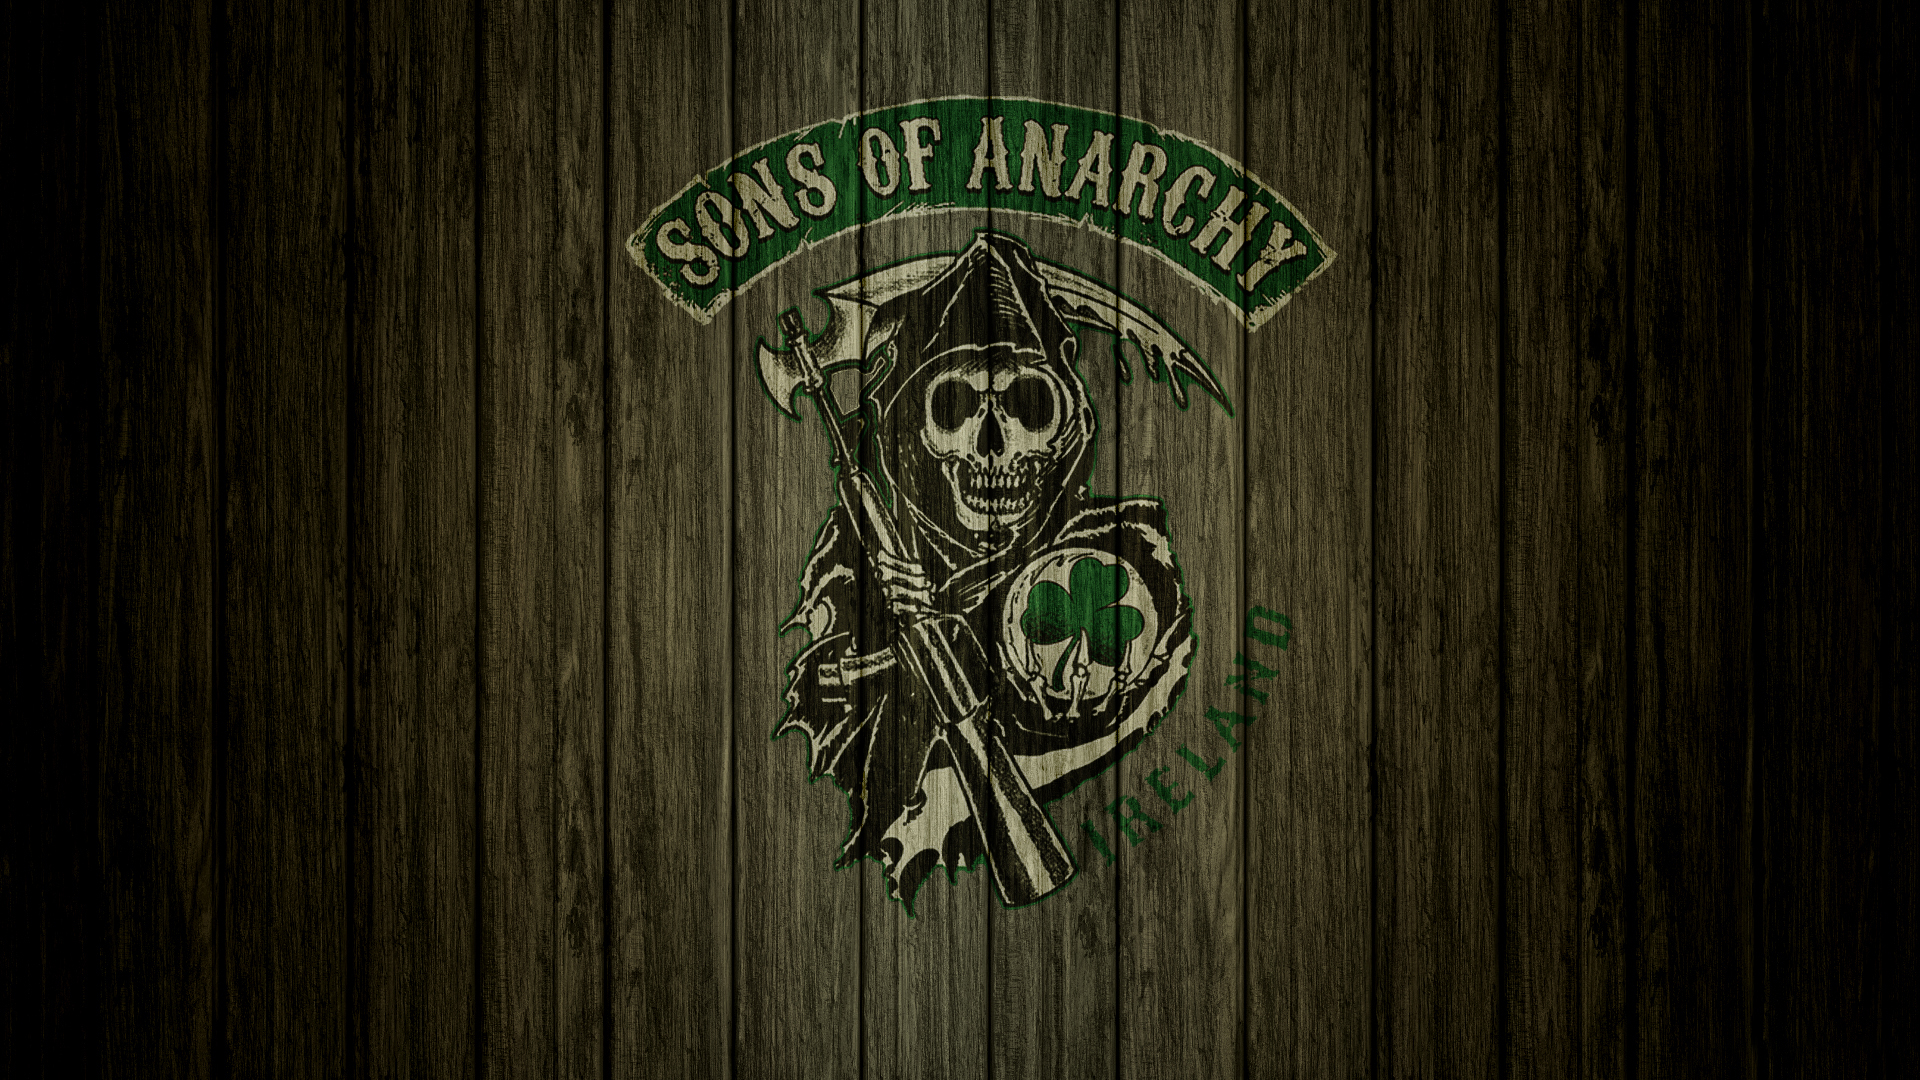 By Stephen Ments Off On Sons Of Anarchy HD Wallpaper